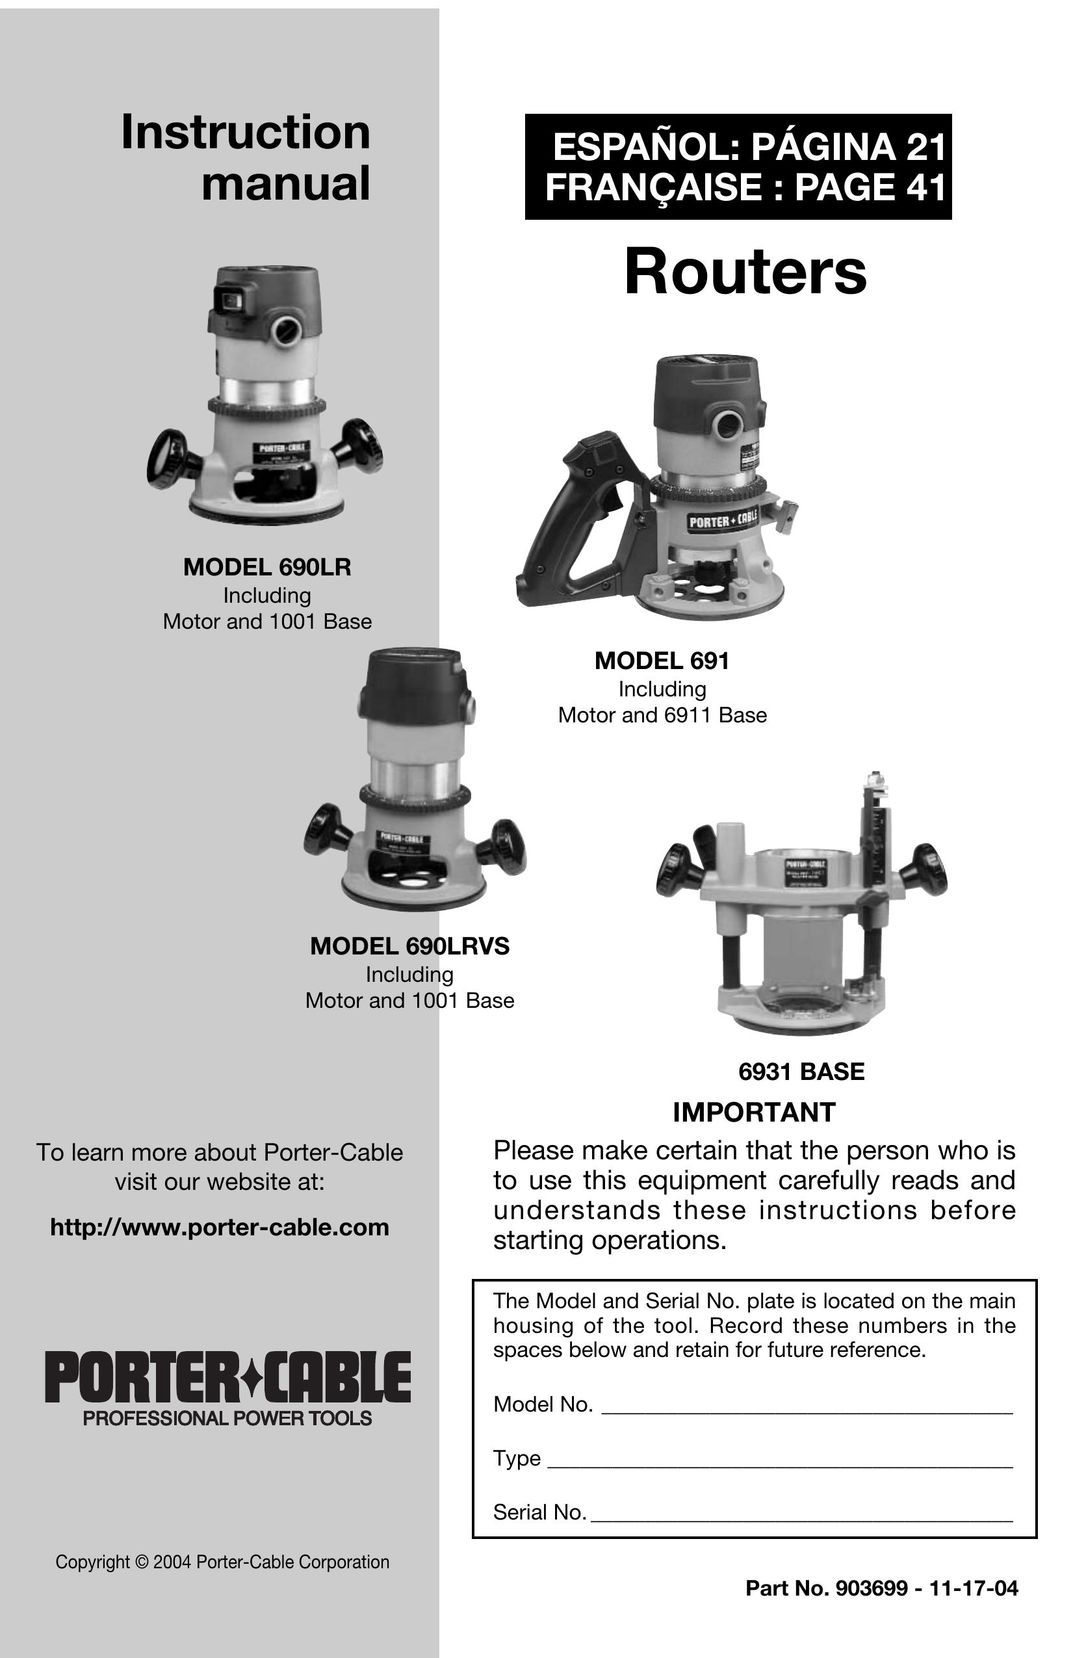 Porter-Cable 690LRVS Router User Manual